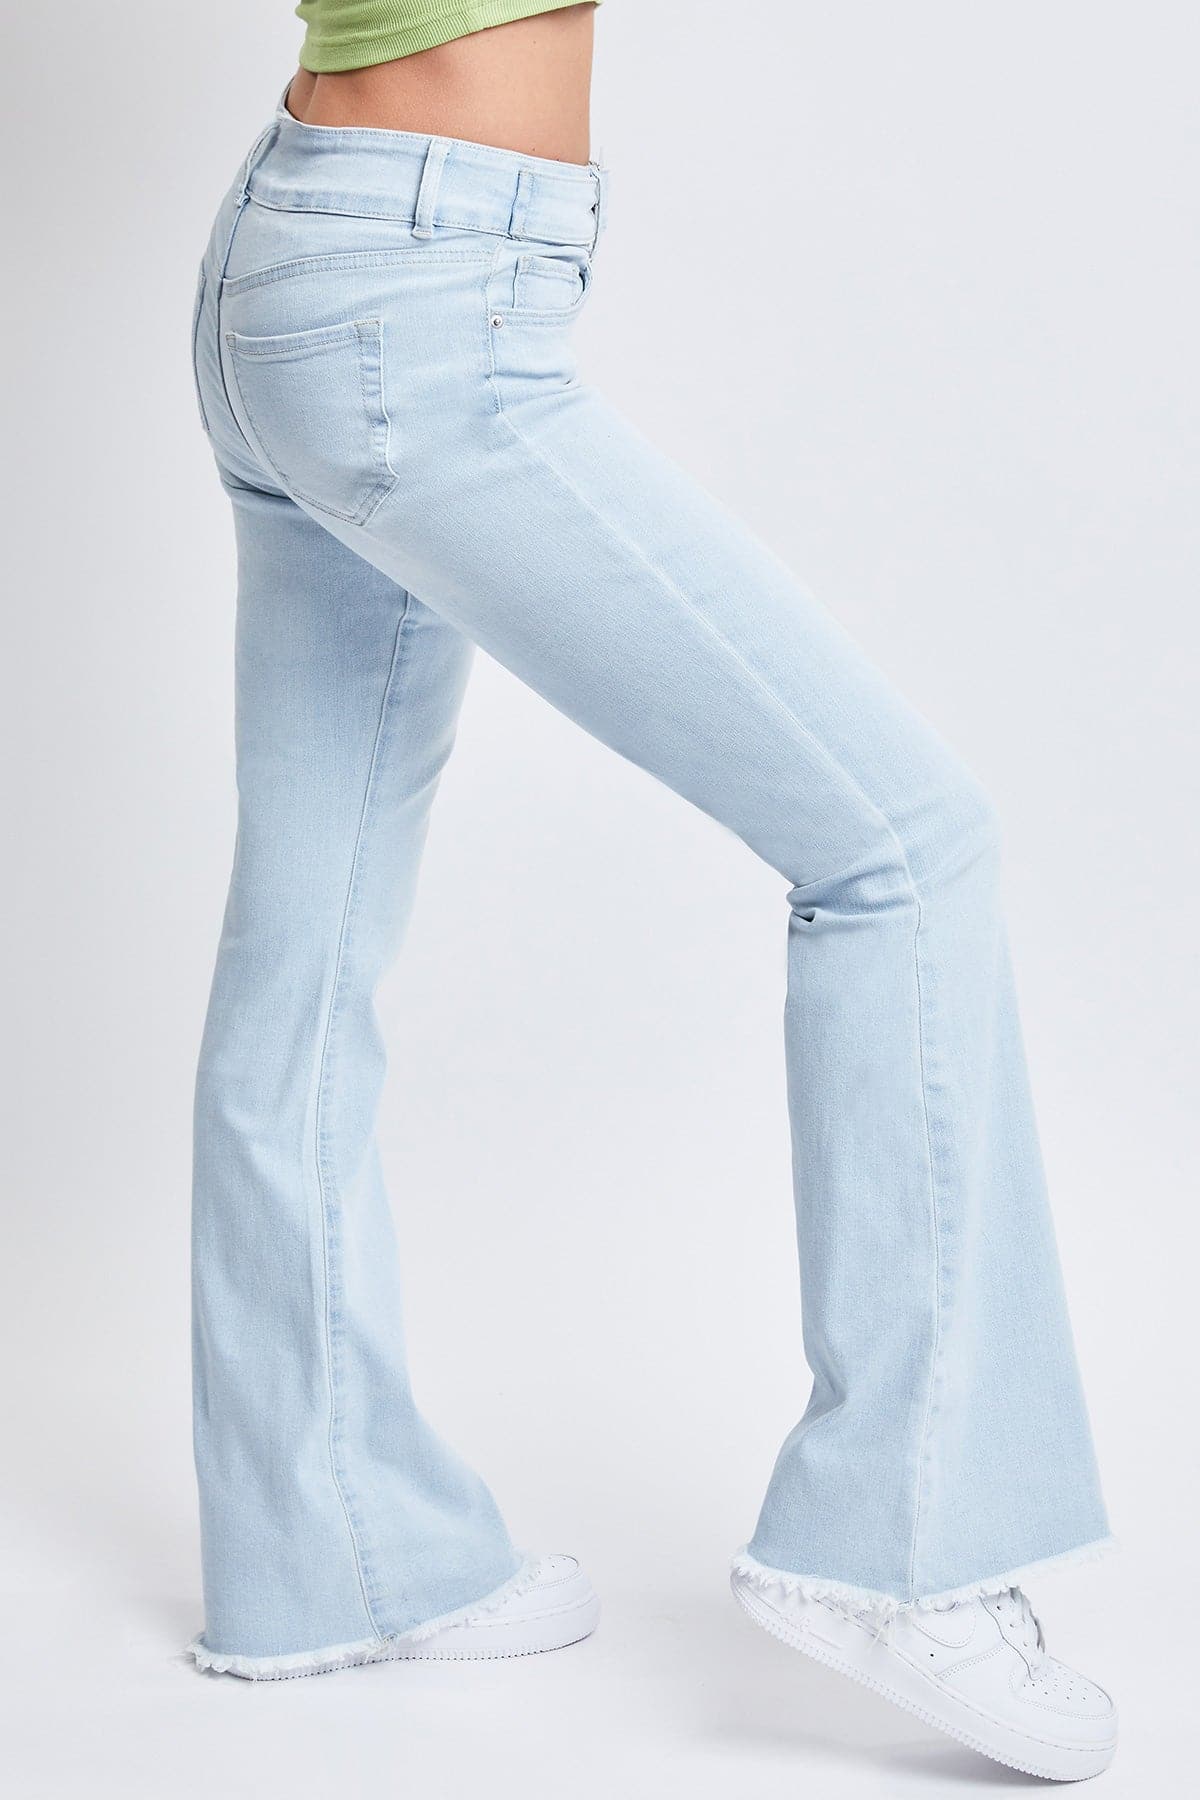 Women's Belted Flare Jeans from YMI – YMI JEANS